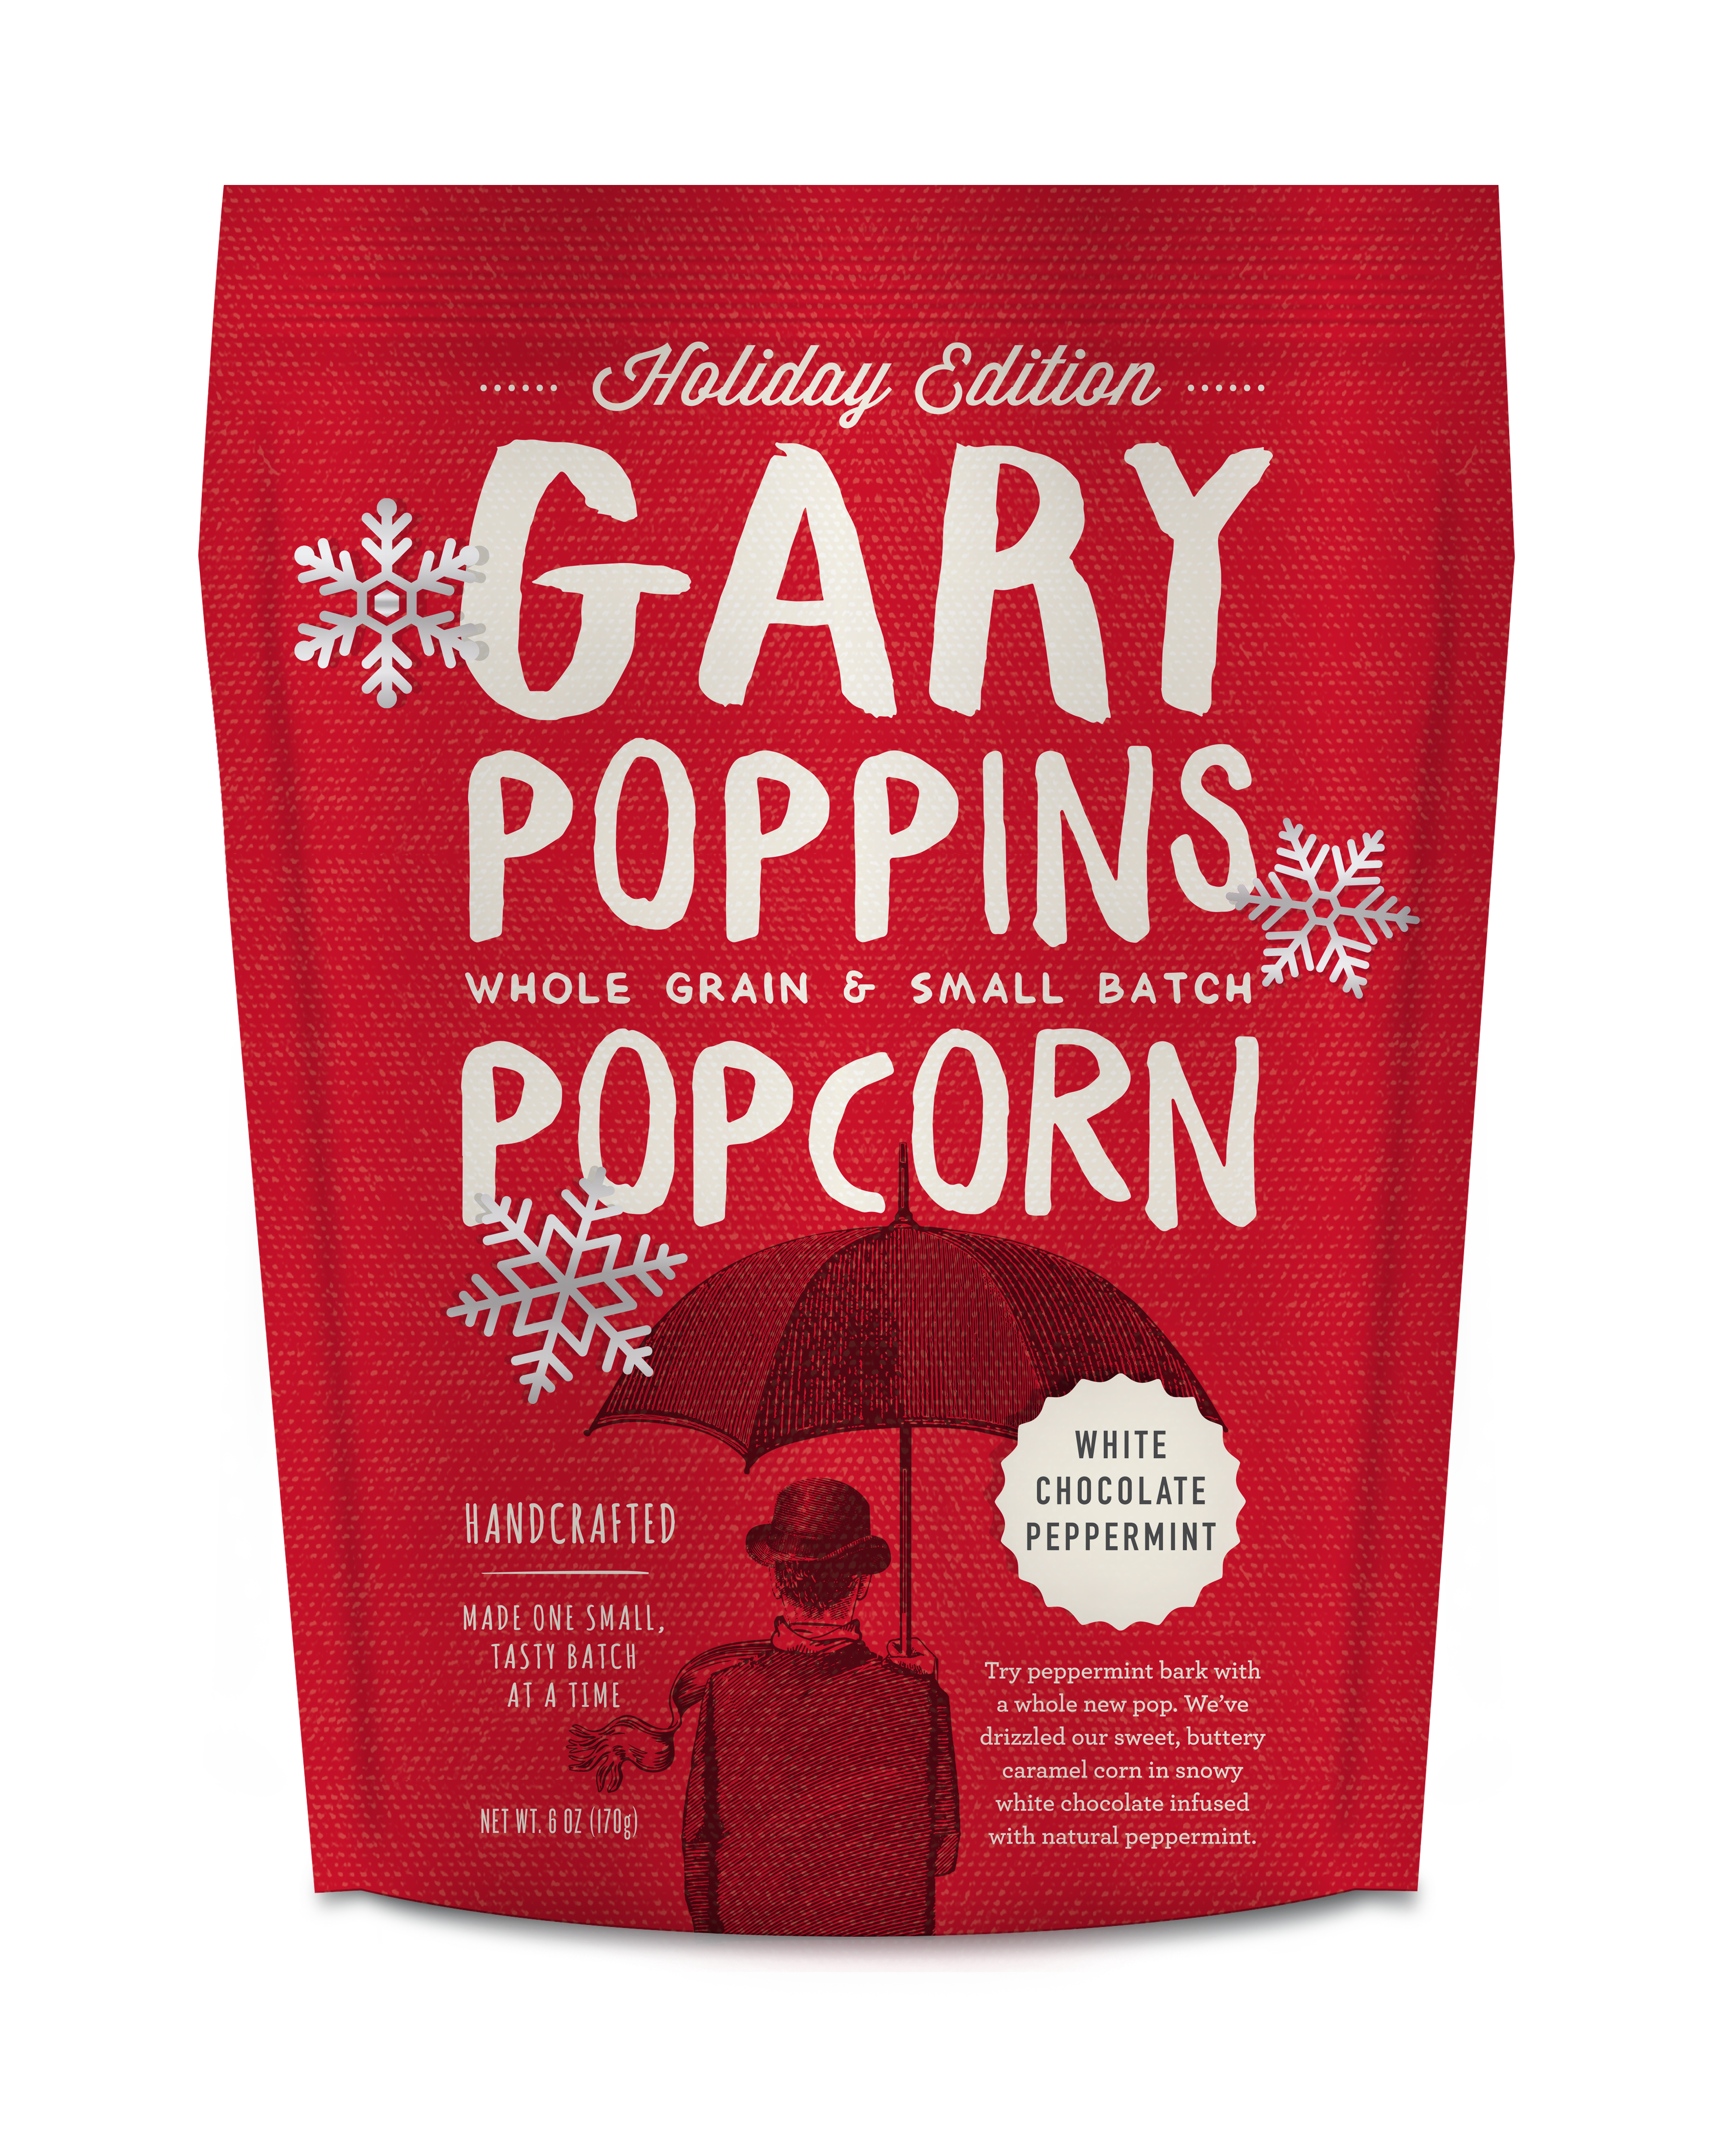 Gary Poppins Holiday Edition Popcorn - White Chocolate Peppermint